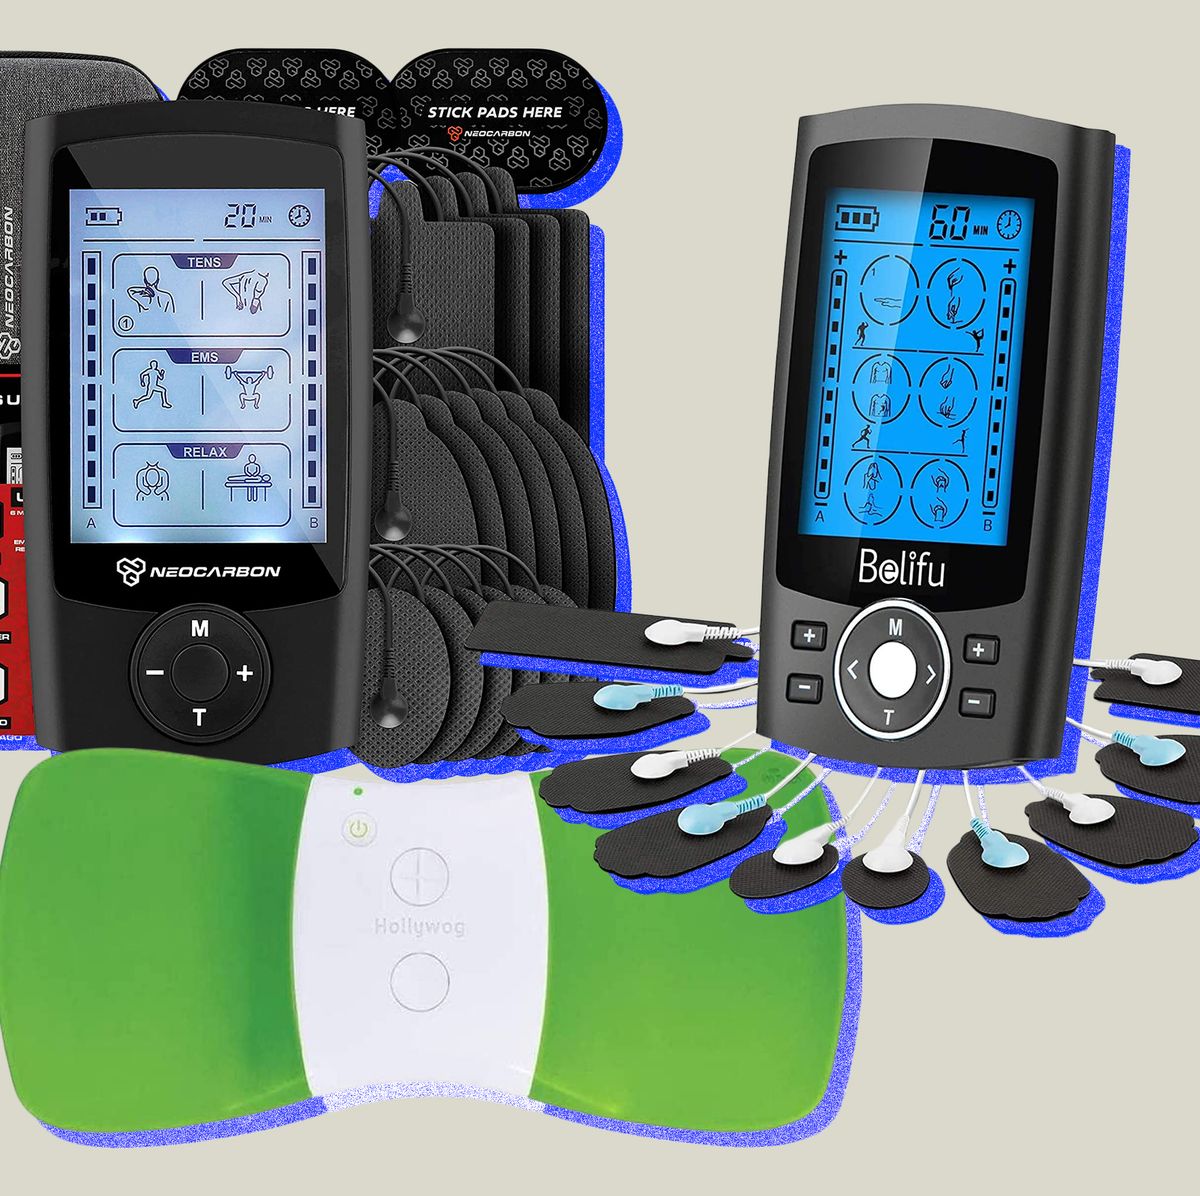 OMRON Pocket Pain Pro TENS Unit for On-The-Go Pain Relief